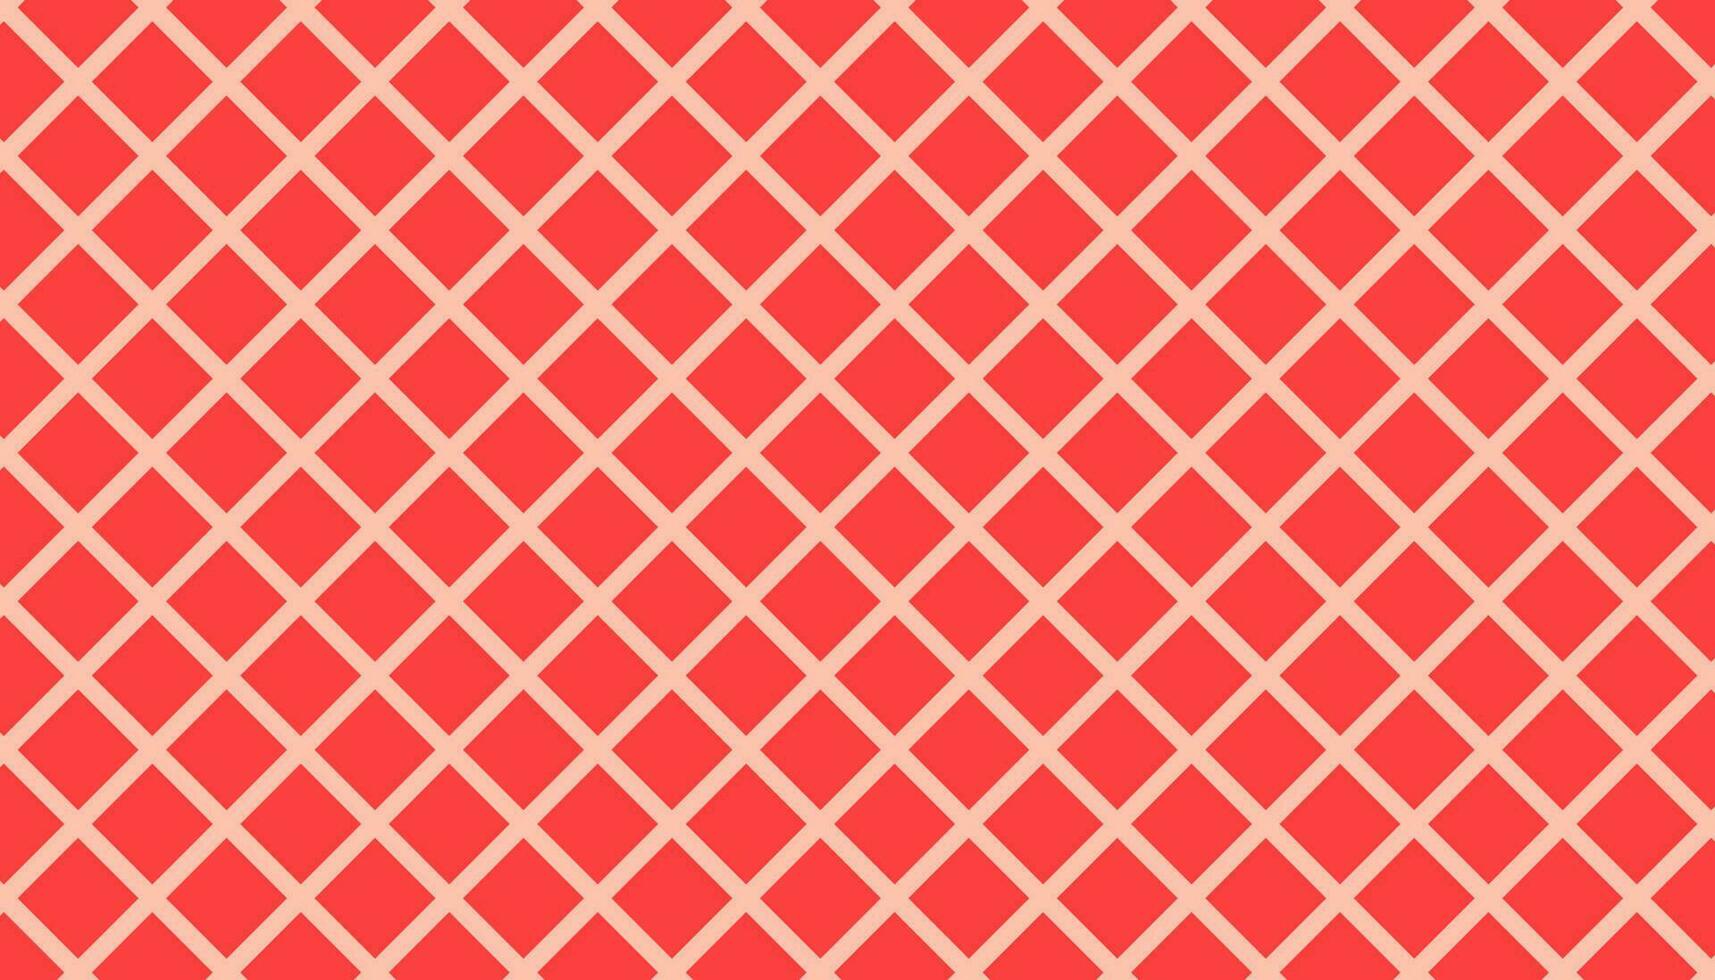 Red quilted square rhombuses mosaic grid pattern. Vector illustration.